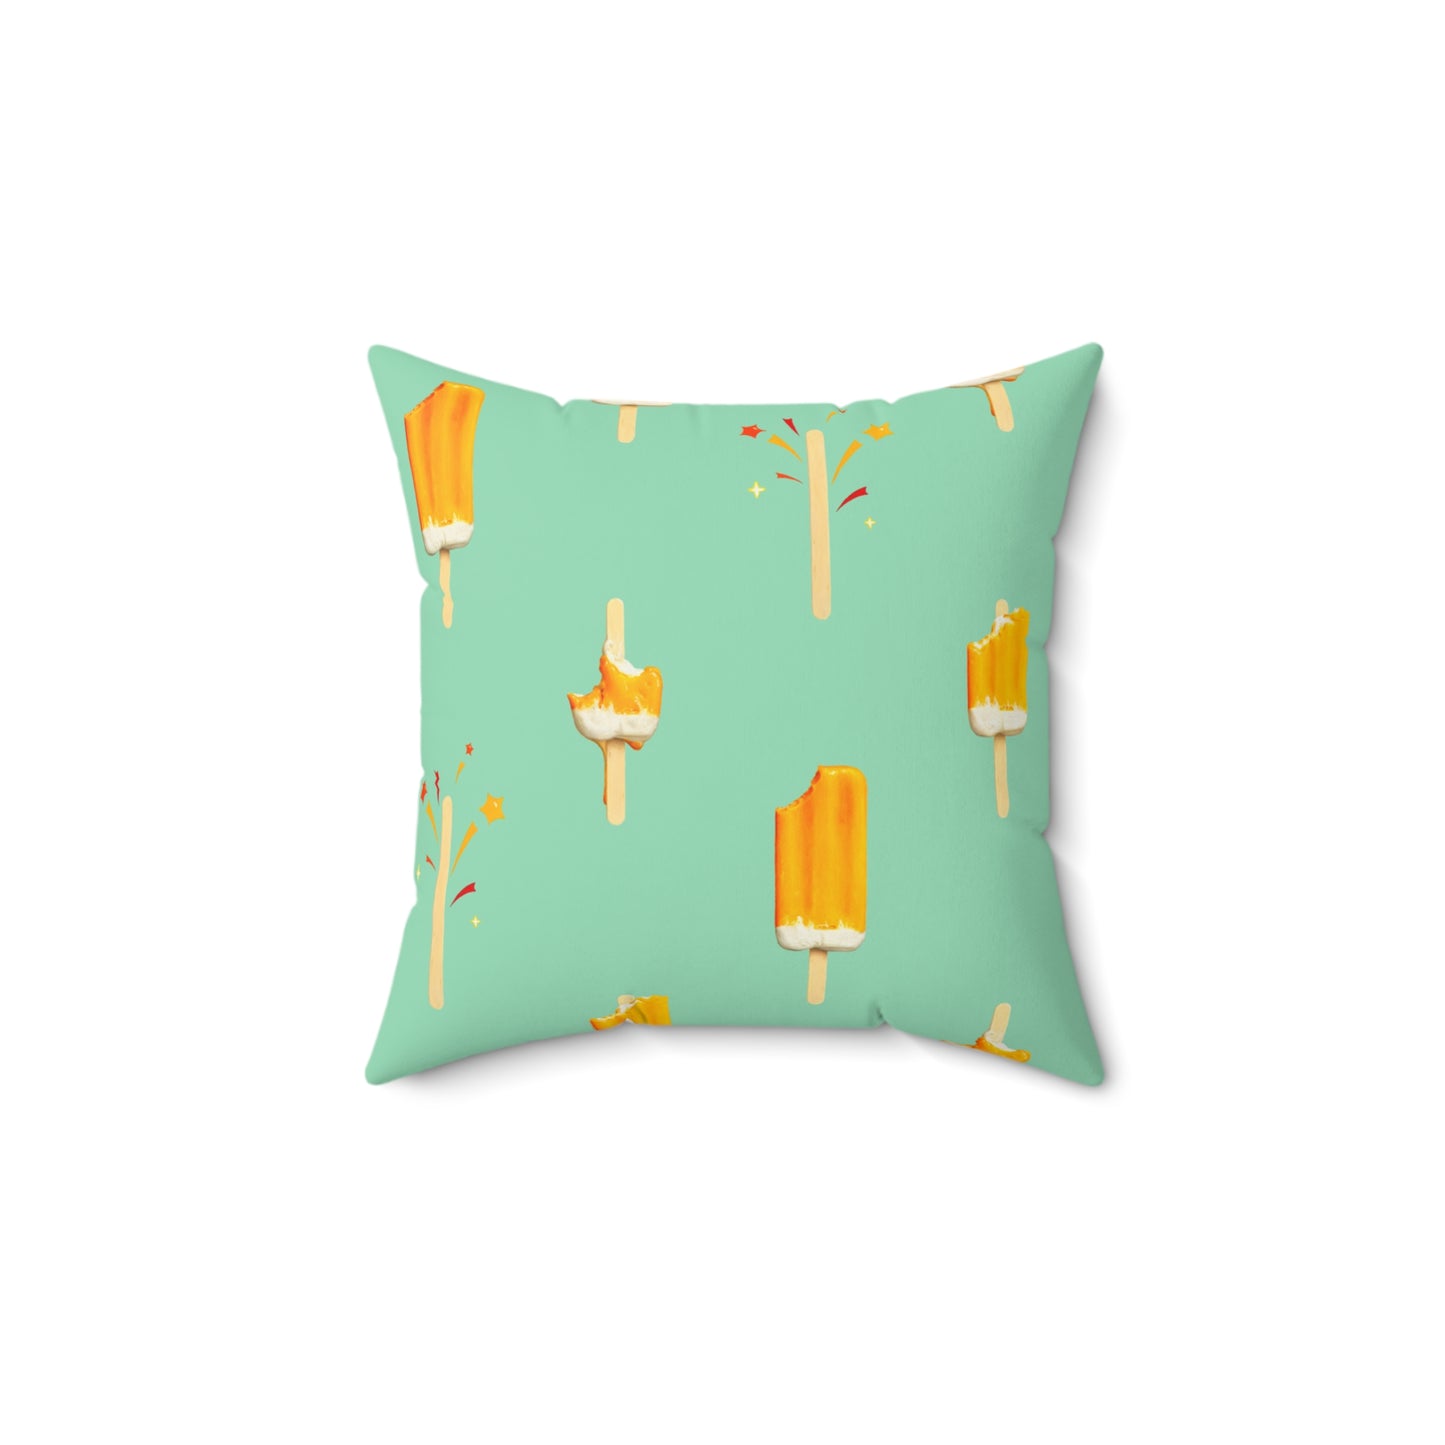 Beth Sistrunk: "Going, Going, Gone" - Spun Polyester Square Pillow